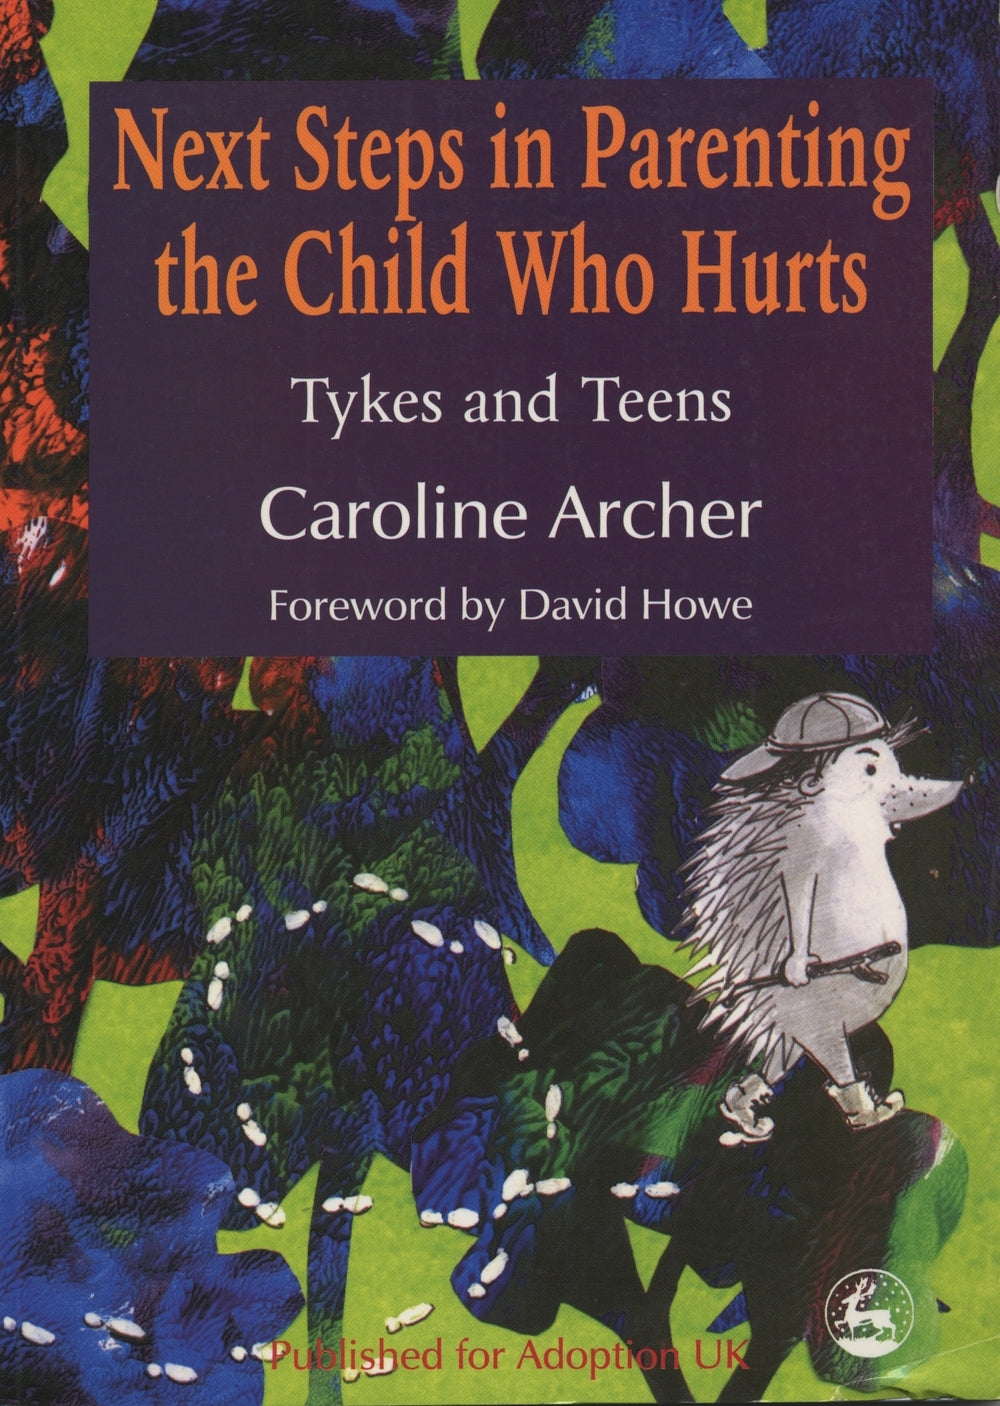 Next Steps in Parenting the Child Who Hurts by Caroline Archer